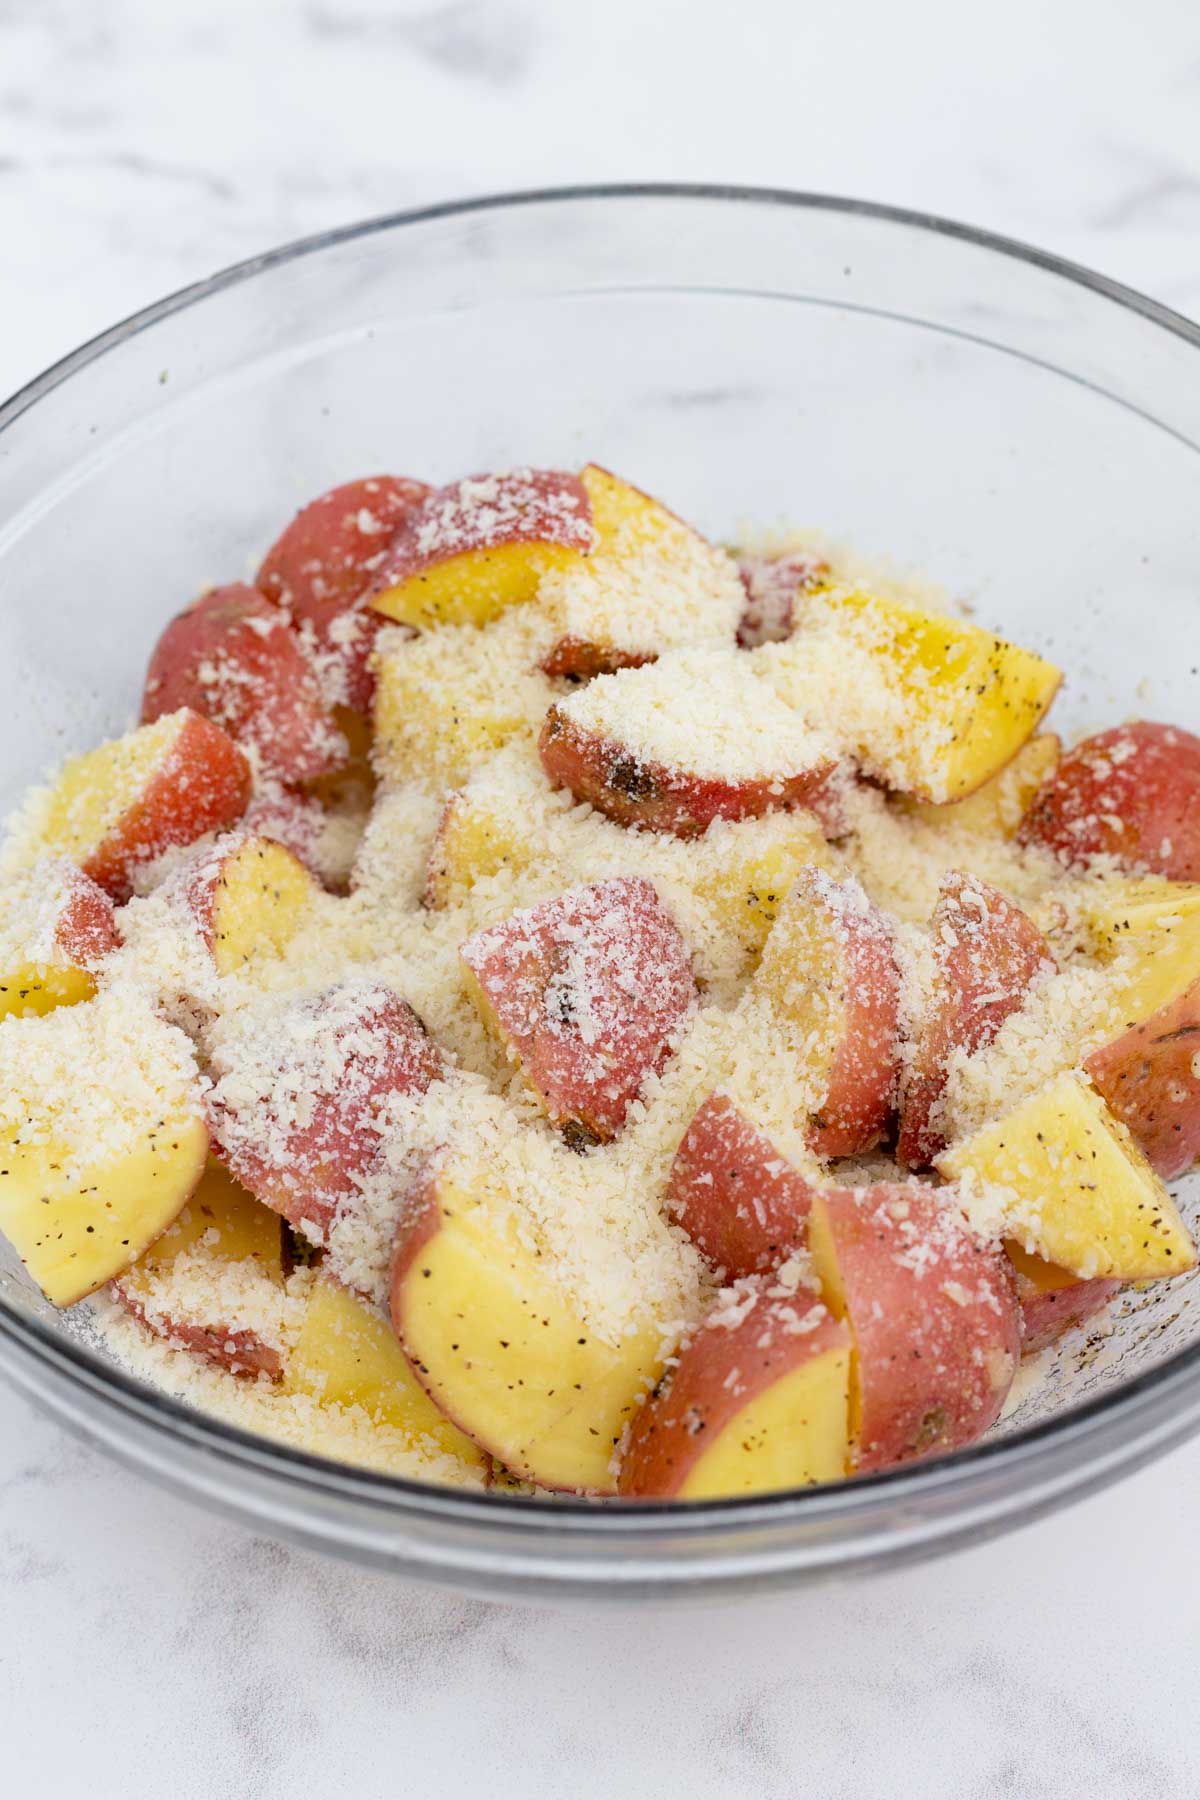 Parmesan cheese is sprinkled over the seasoned potatoes.